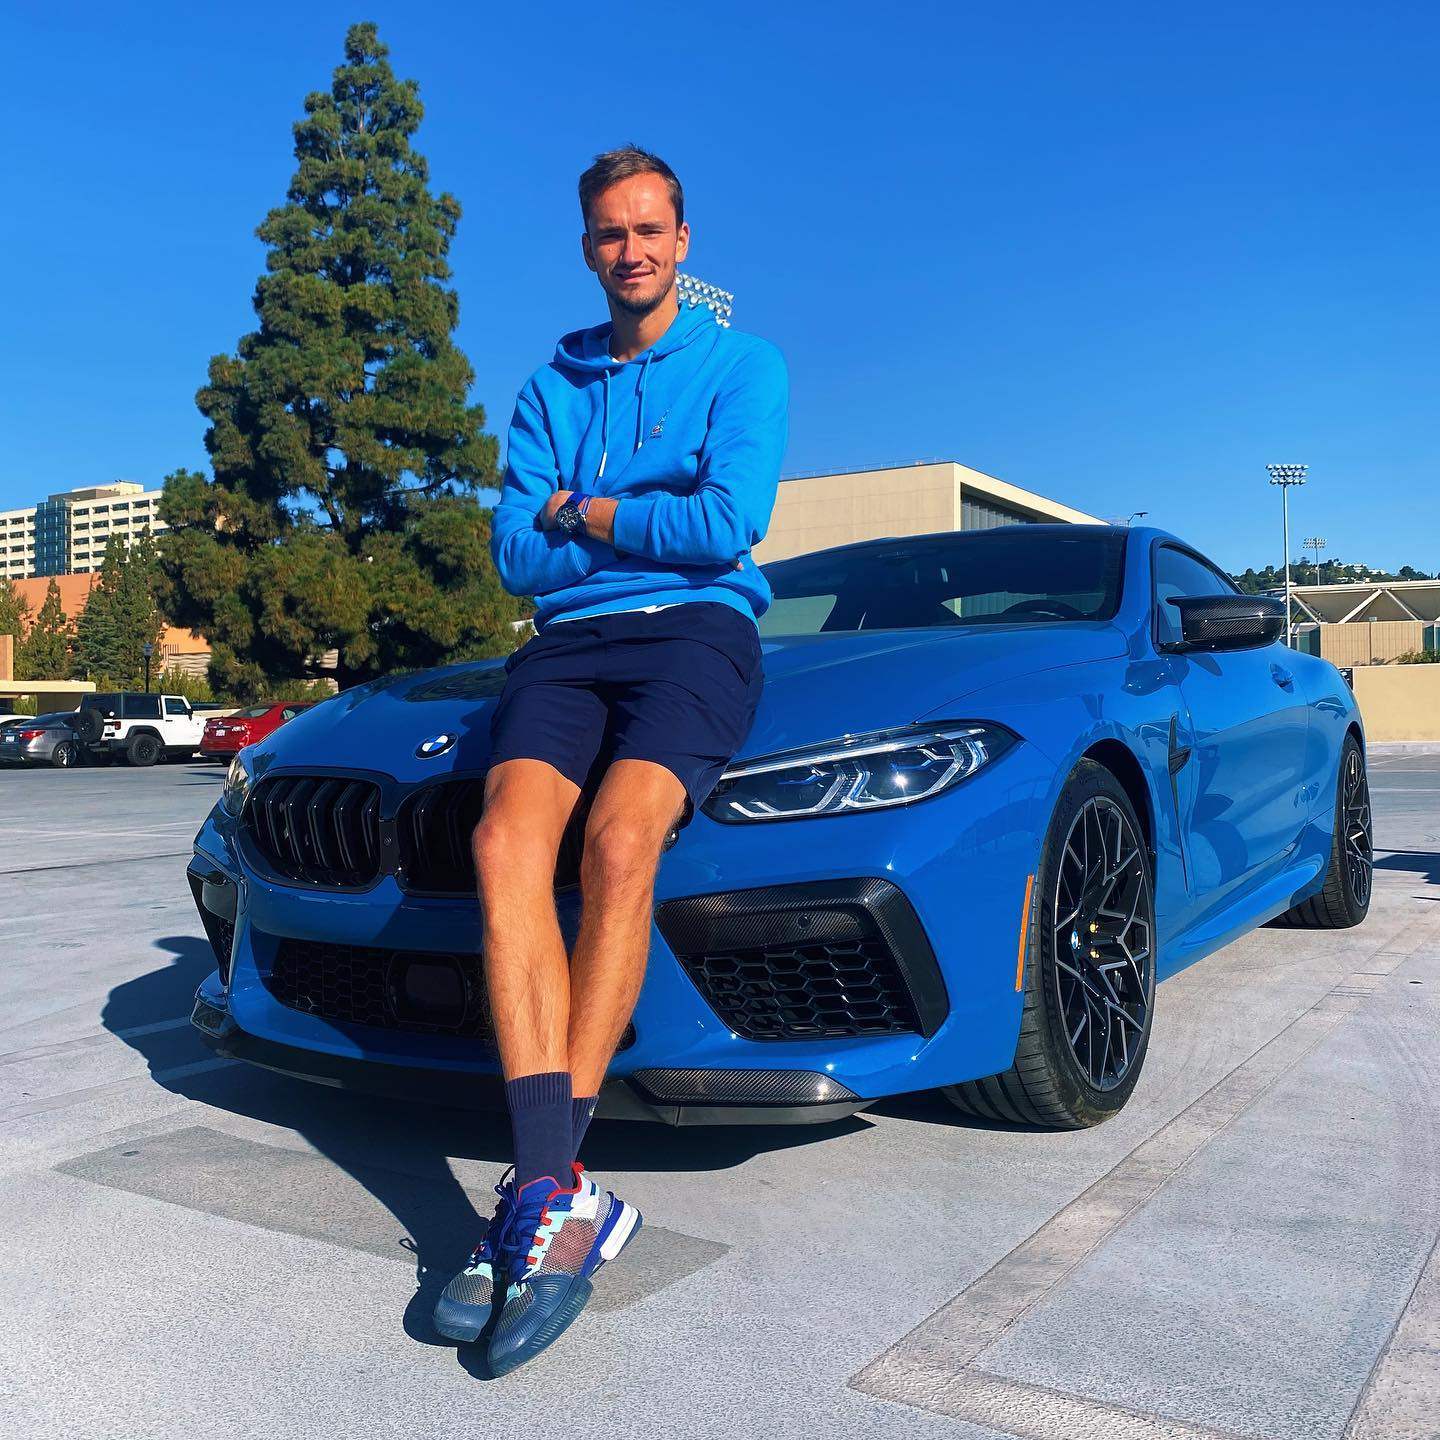 Daniil Medvedev and one of his BMWs, but how much has the Russian tennis star earned? Photo: @medwed33/Instagram